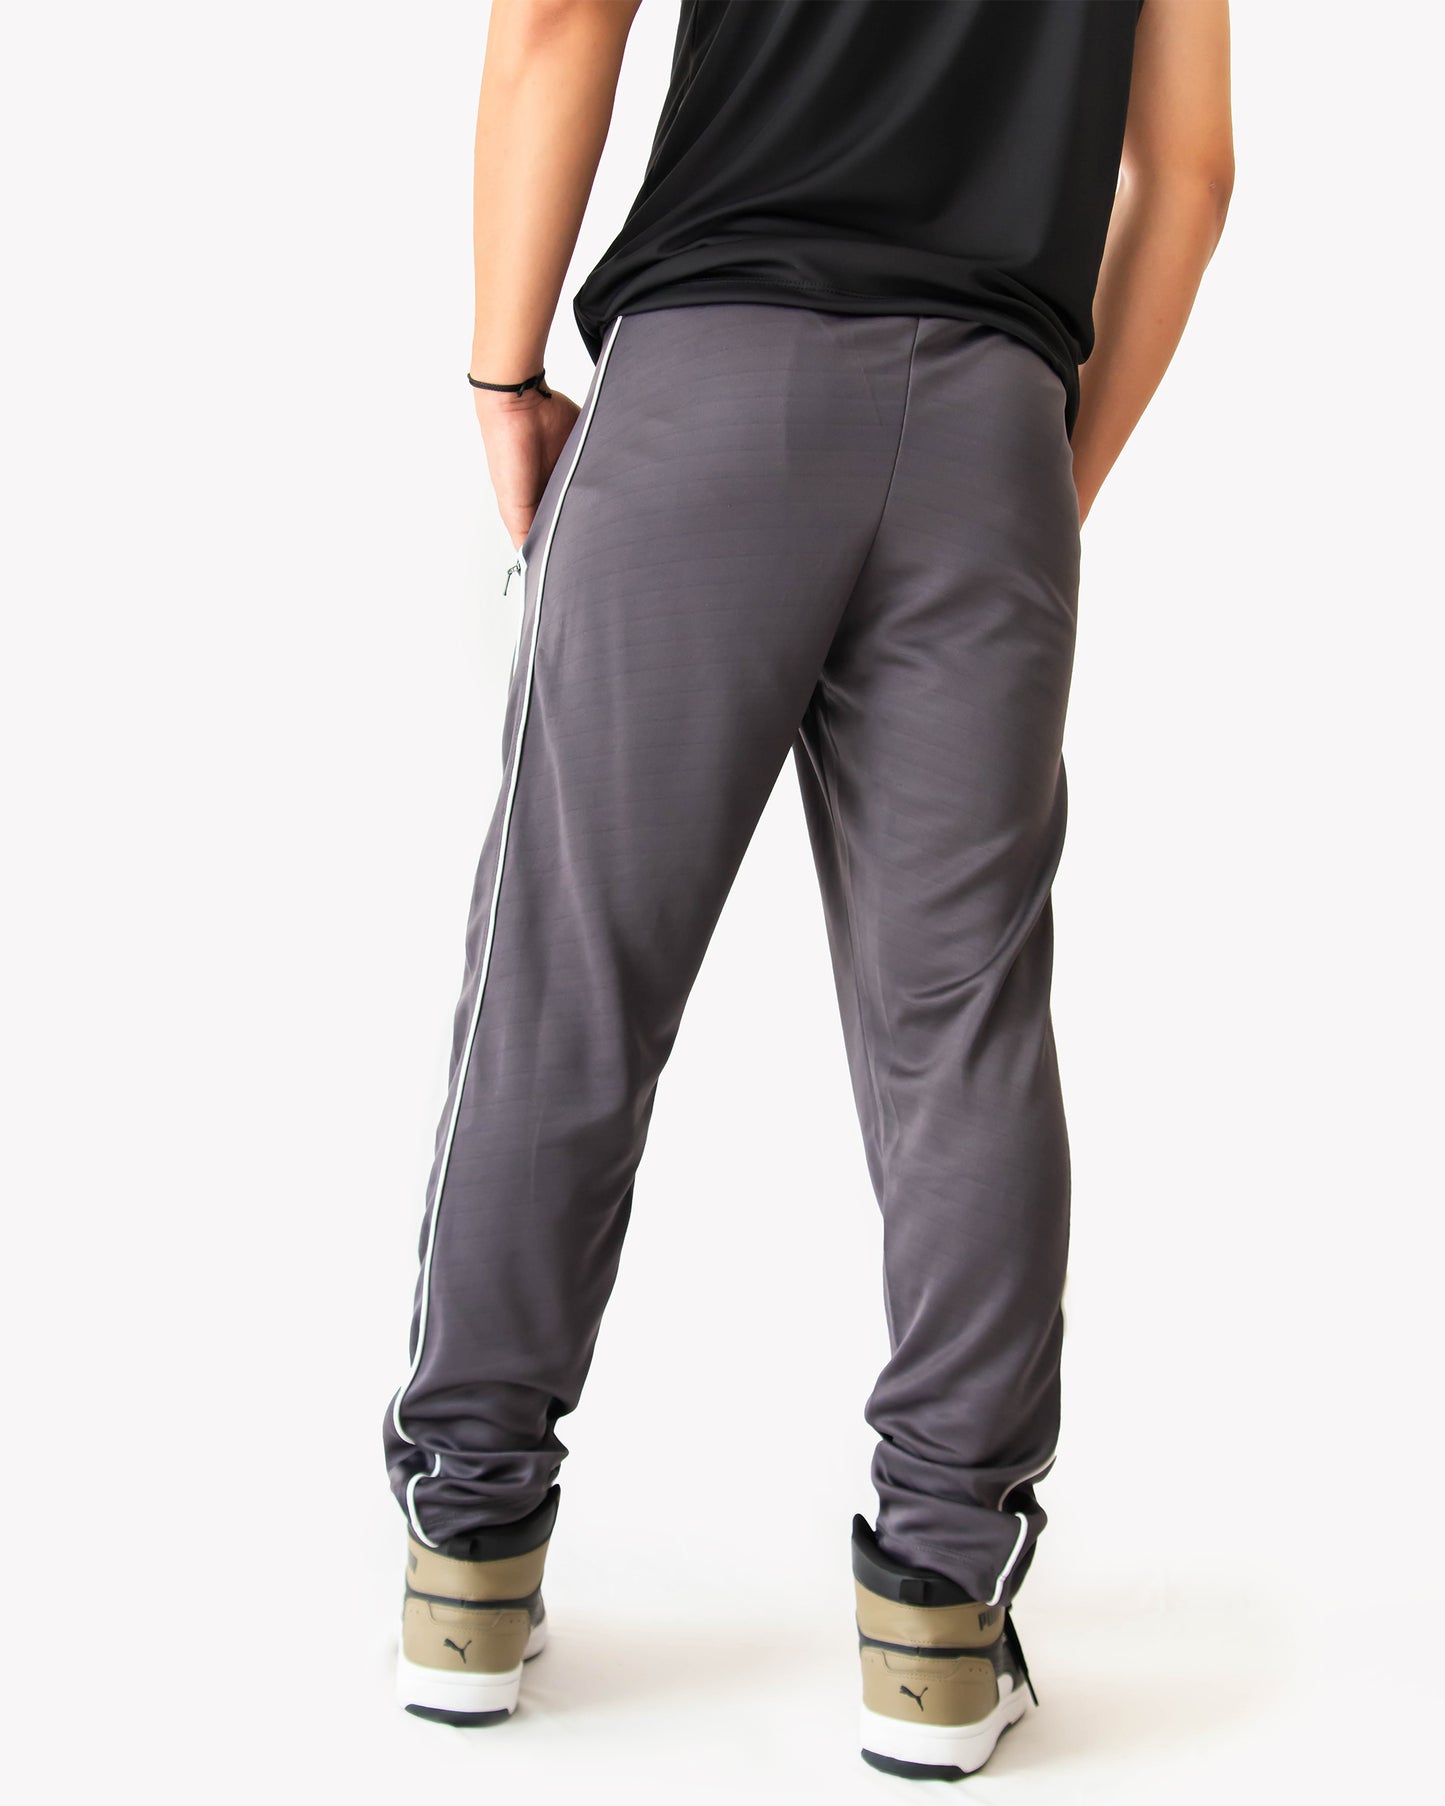 DRY-FIT TROUSER- CRATIN